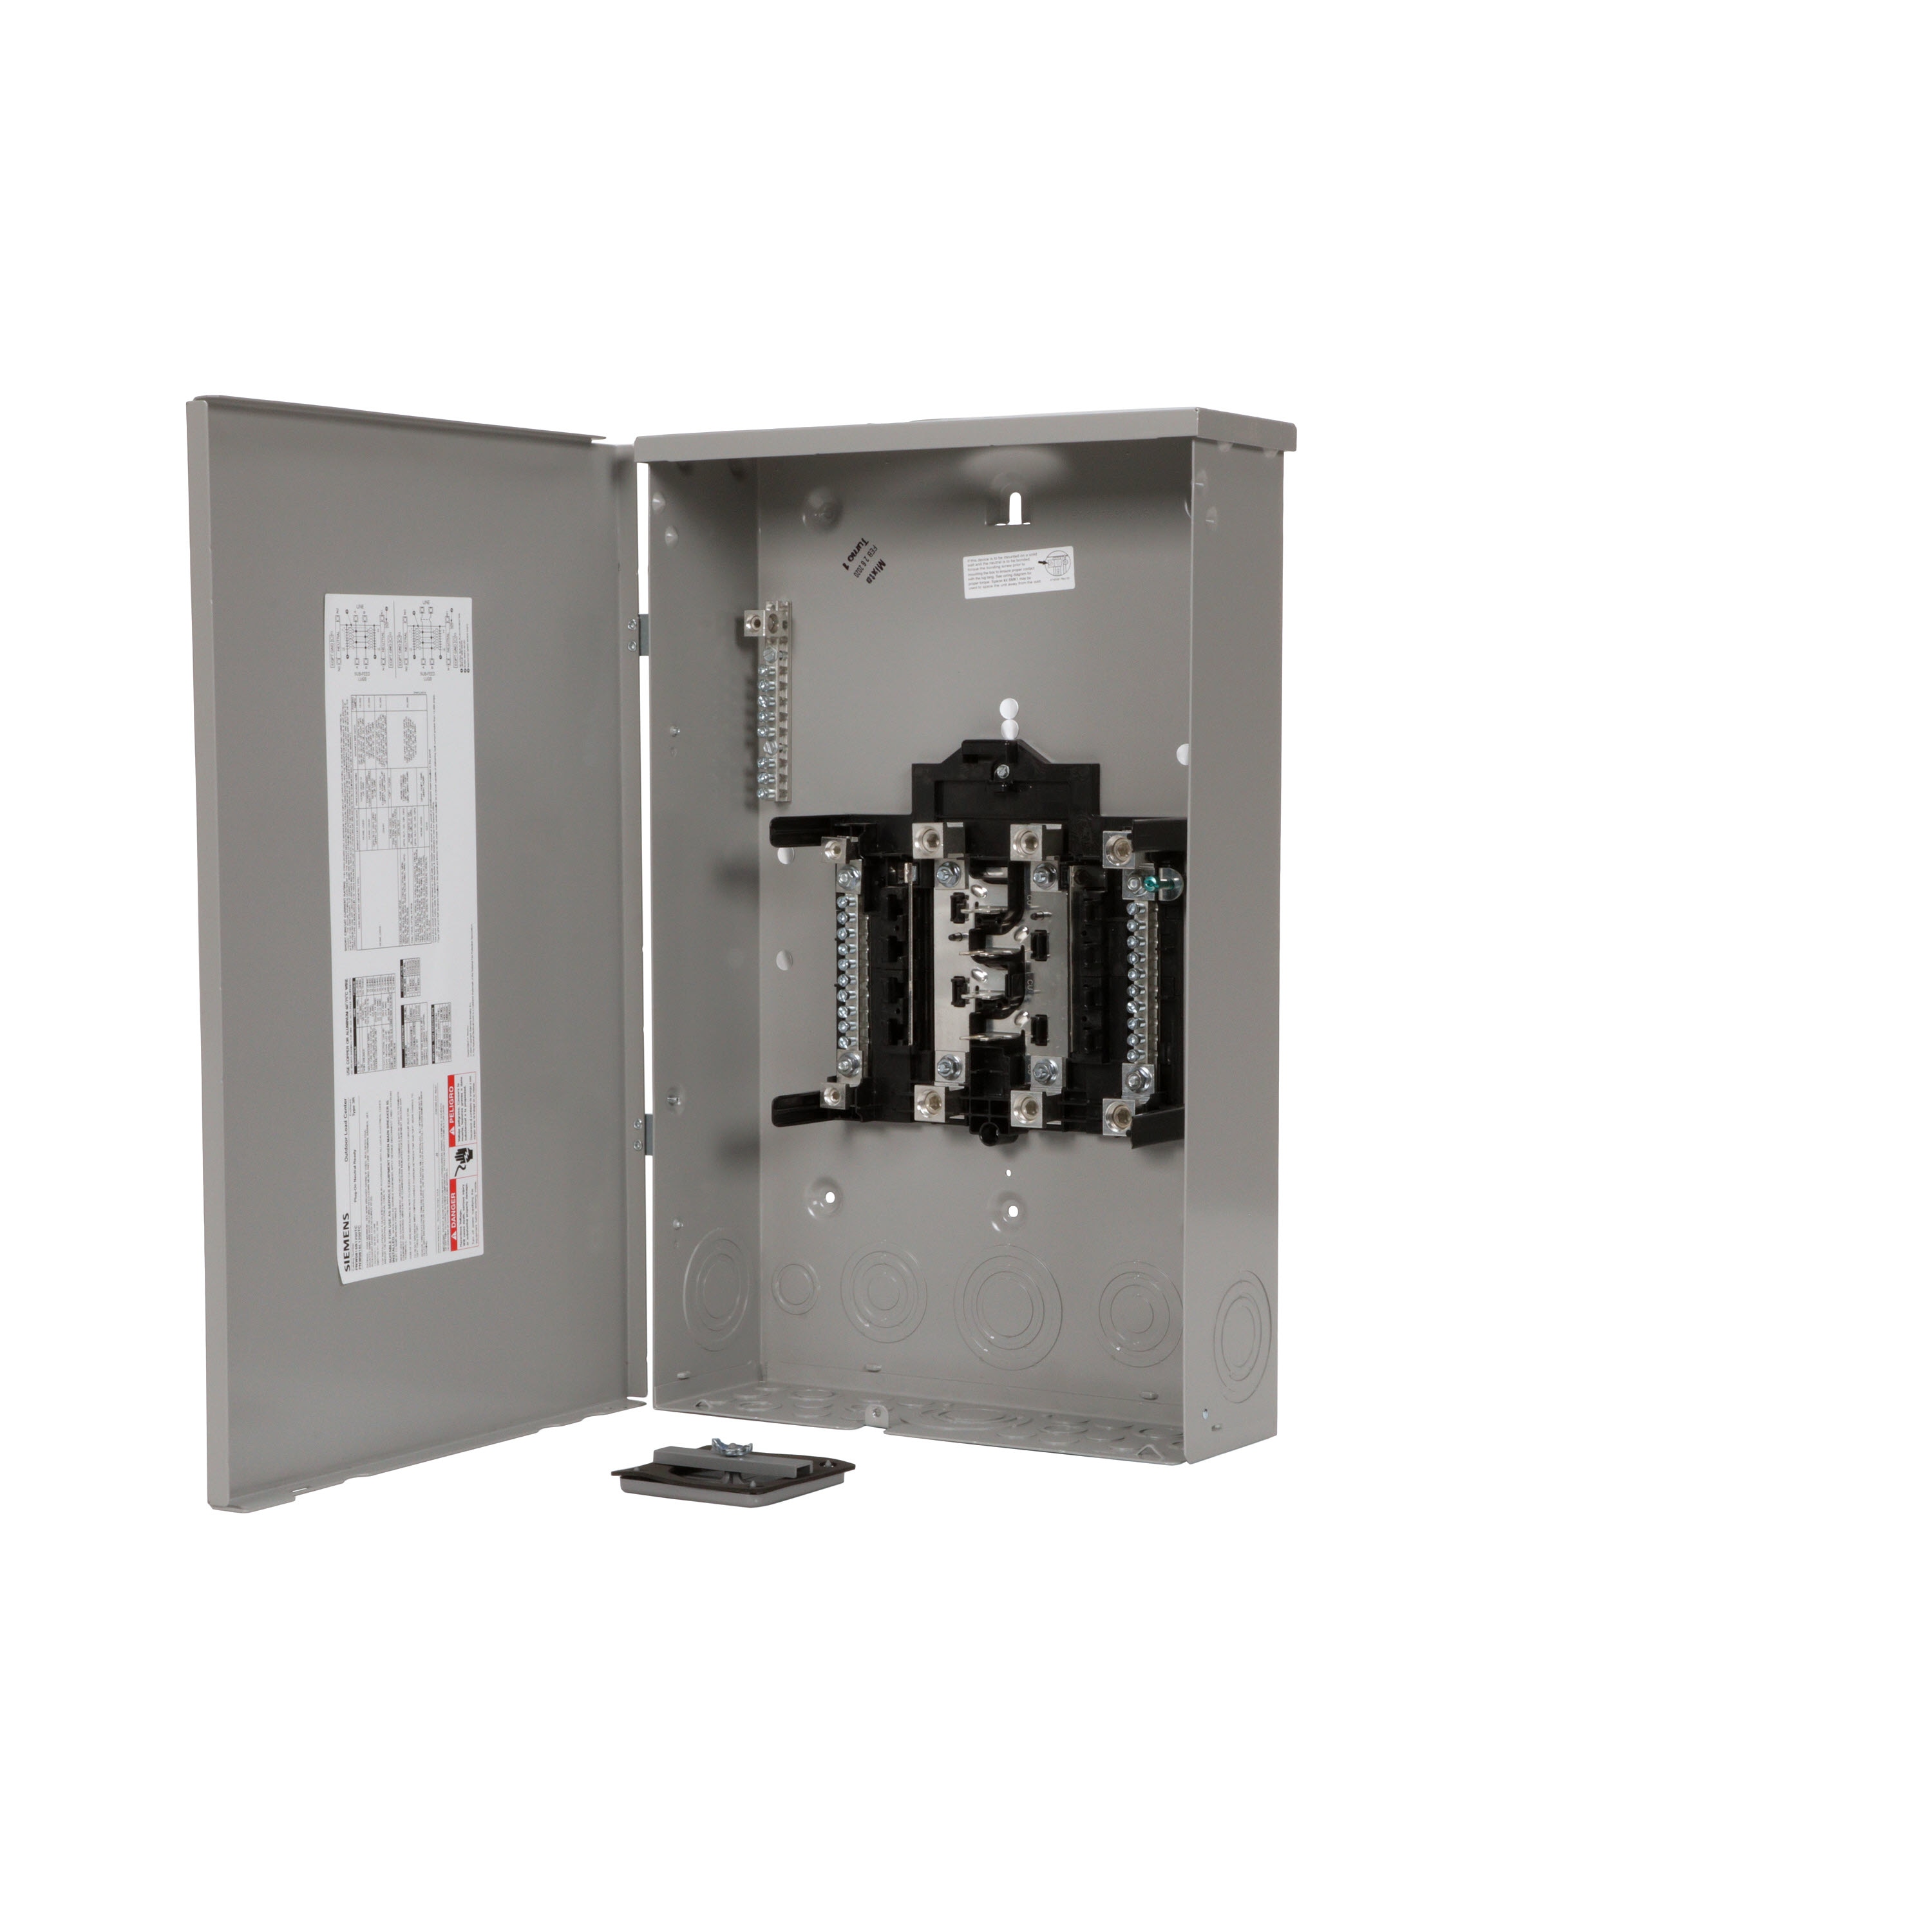 Main Breaker Load Center 200 Amp 8-Space 16-Circuit with Feed-Thru Lug and Cover 